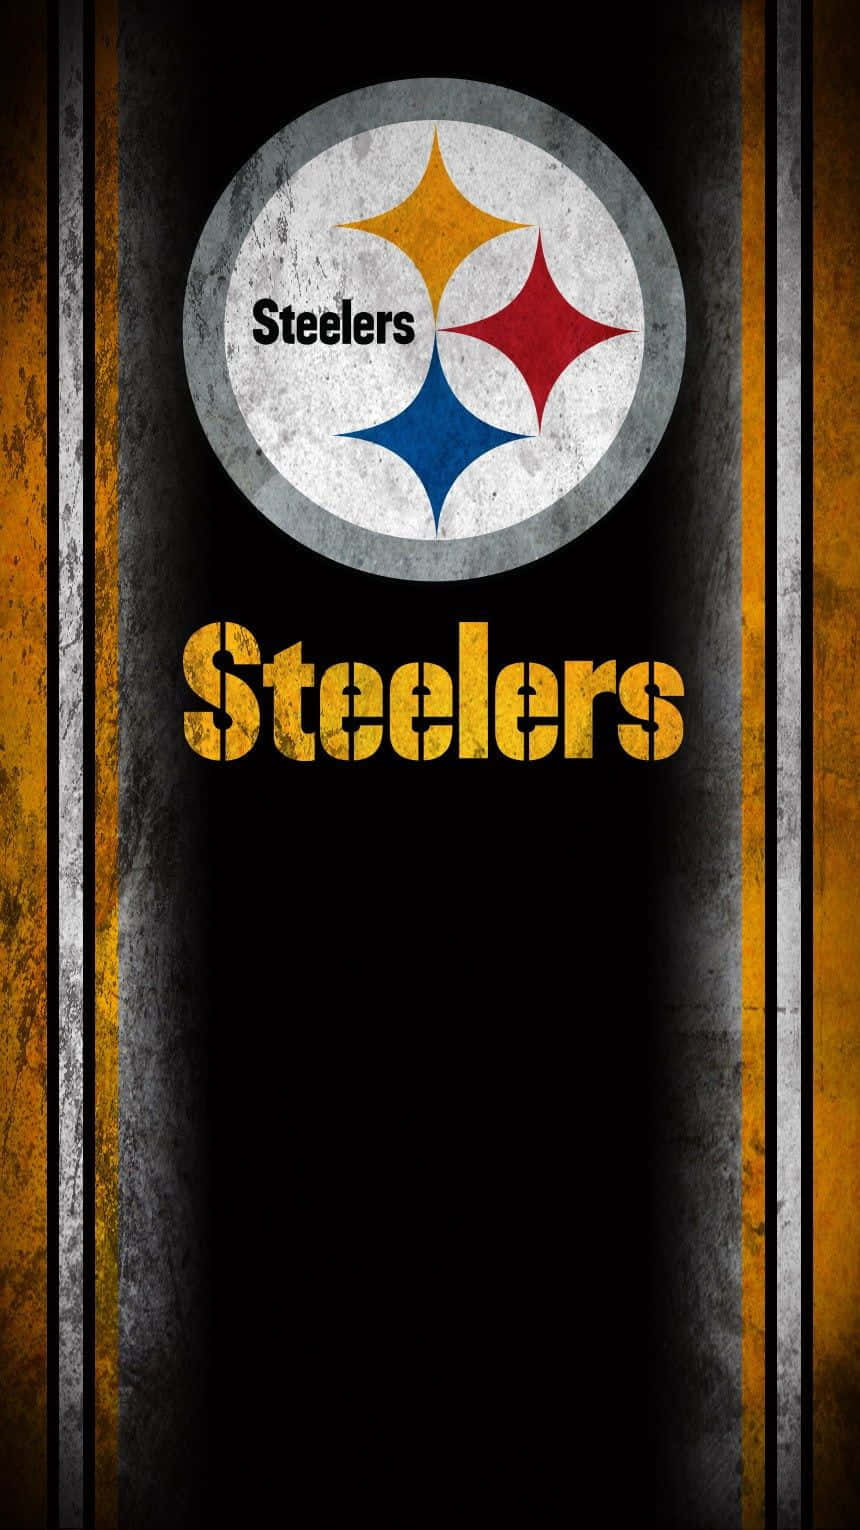 Show Your Steelers Pride On Your Phone!